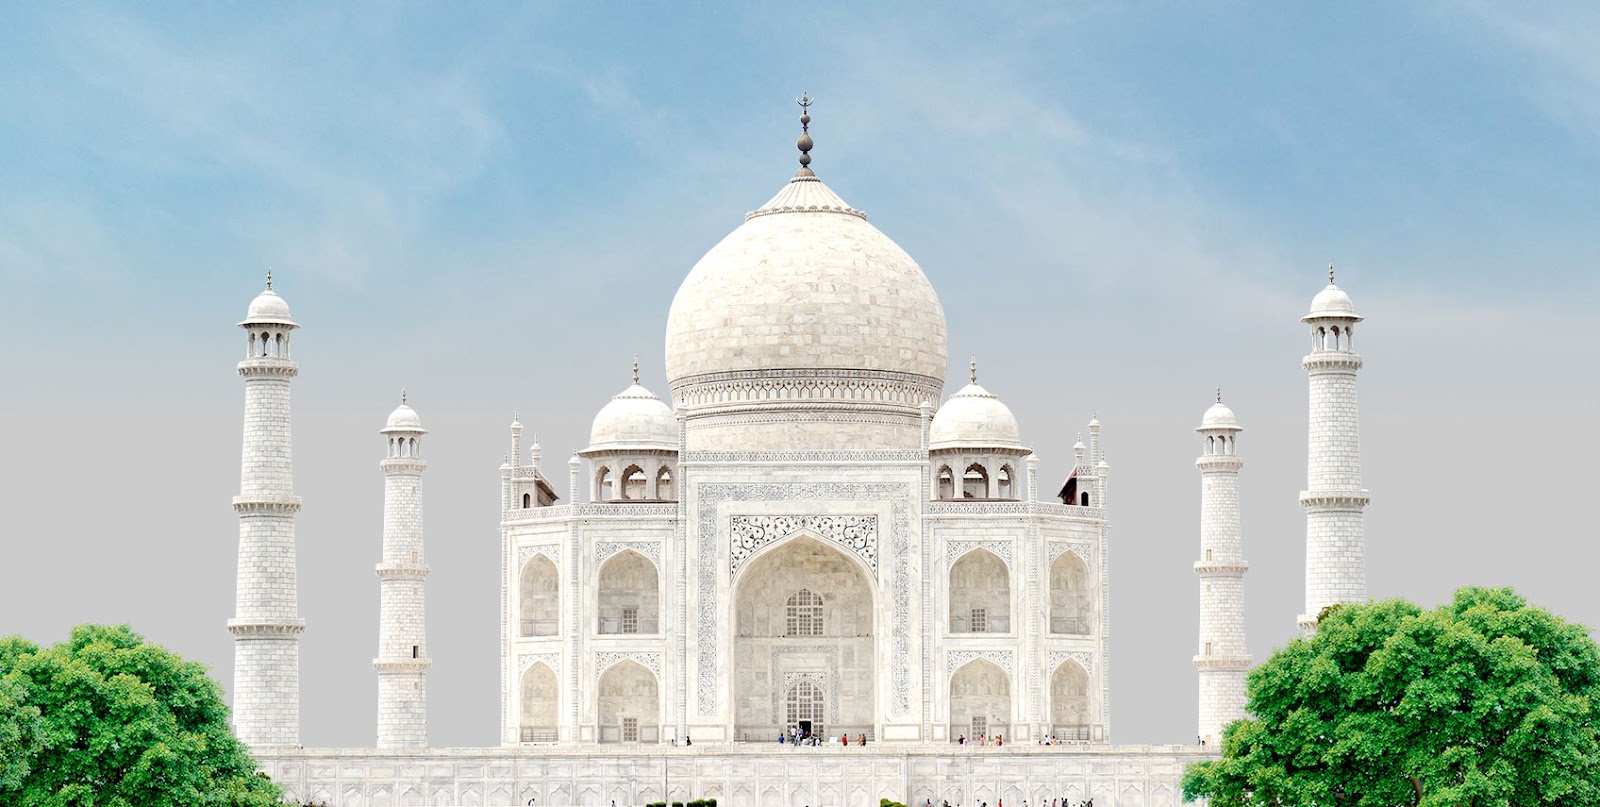 The Hierarchical Dome of the Taj Mahal 